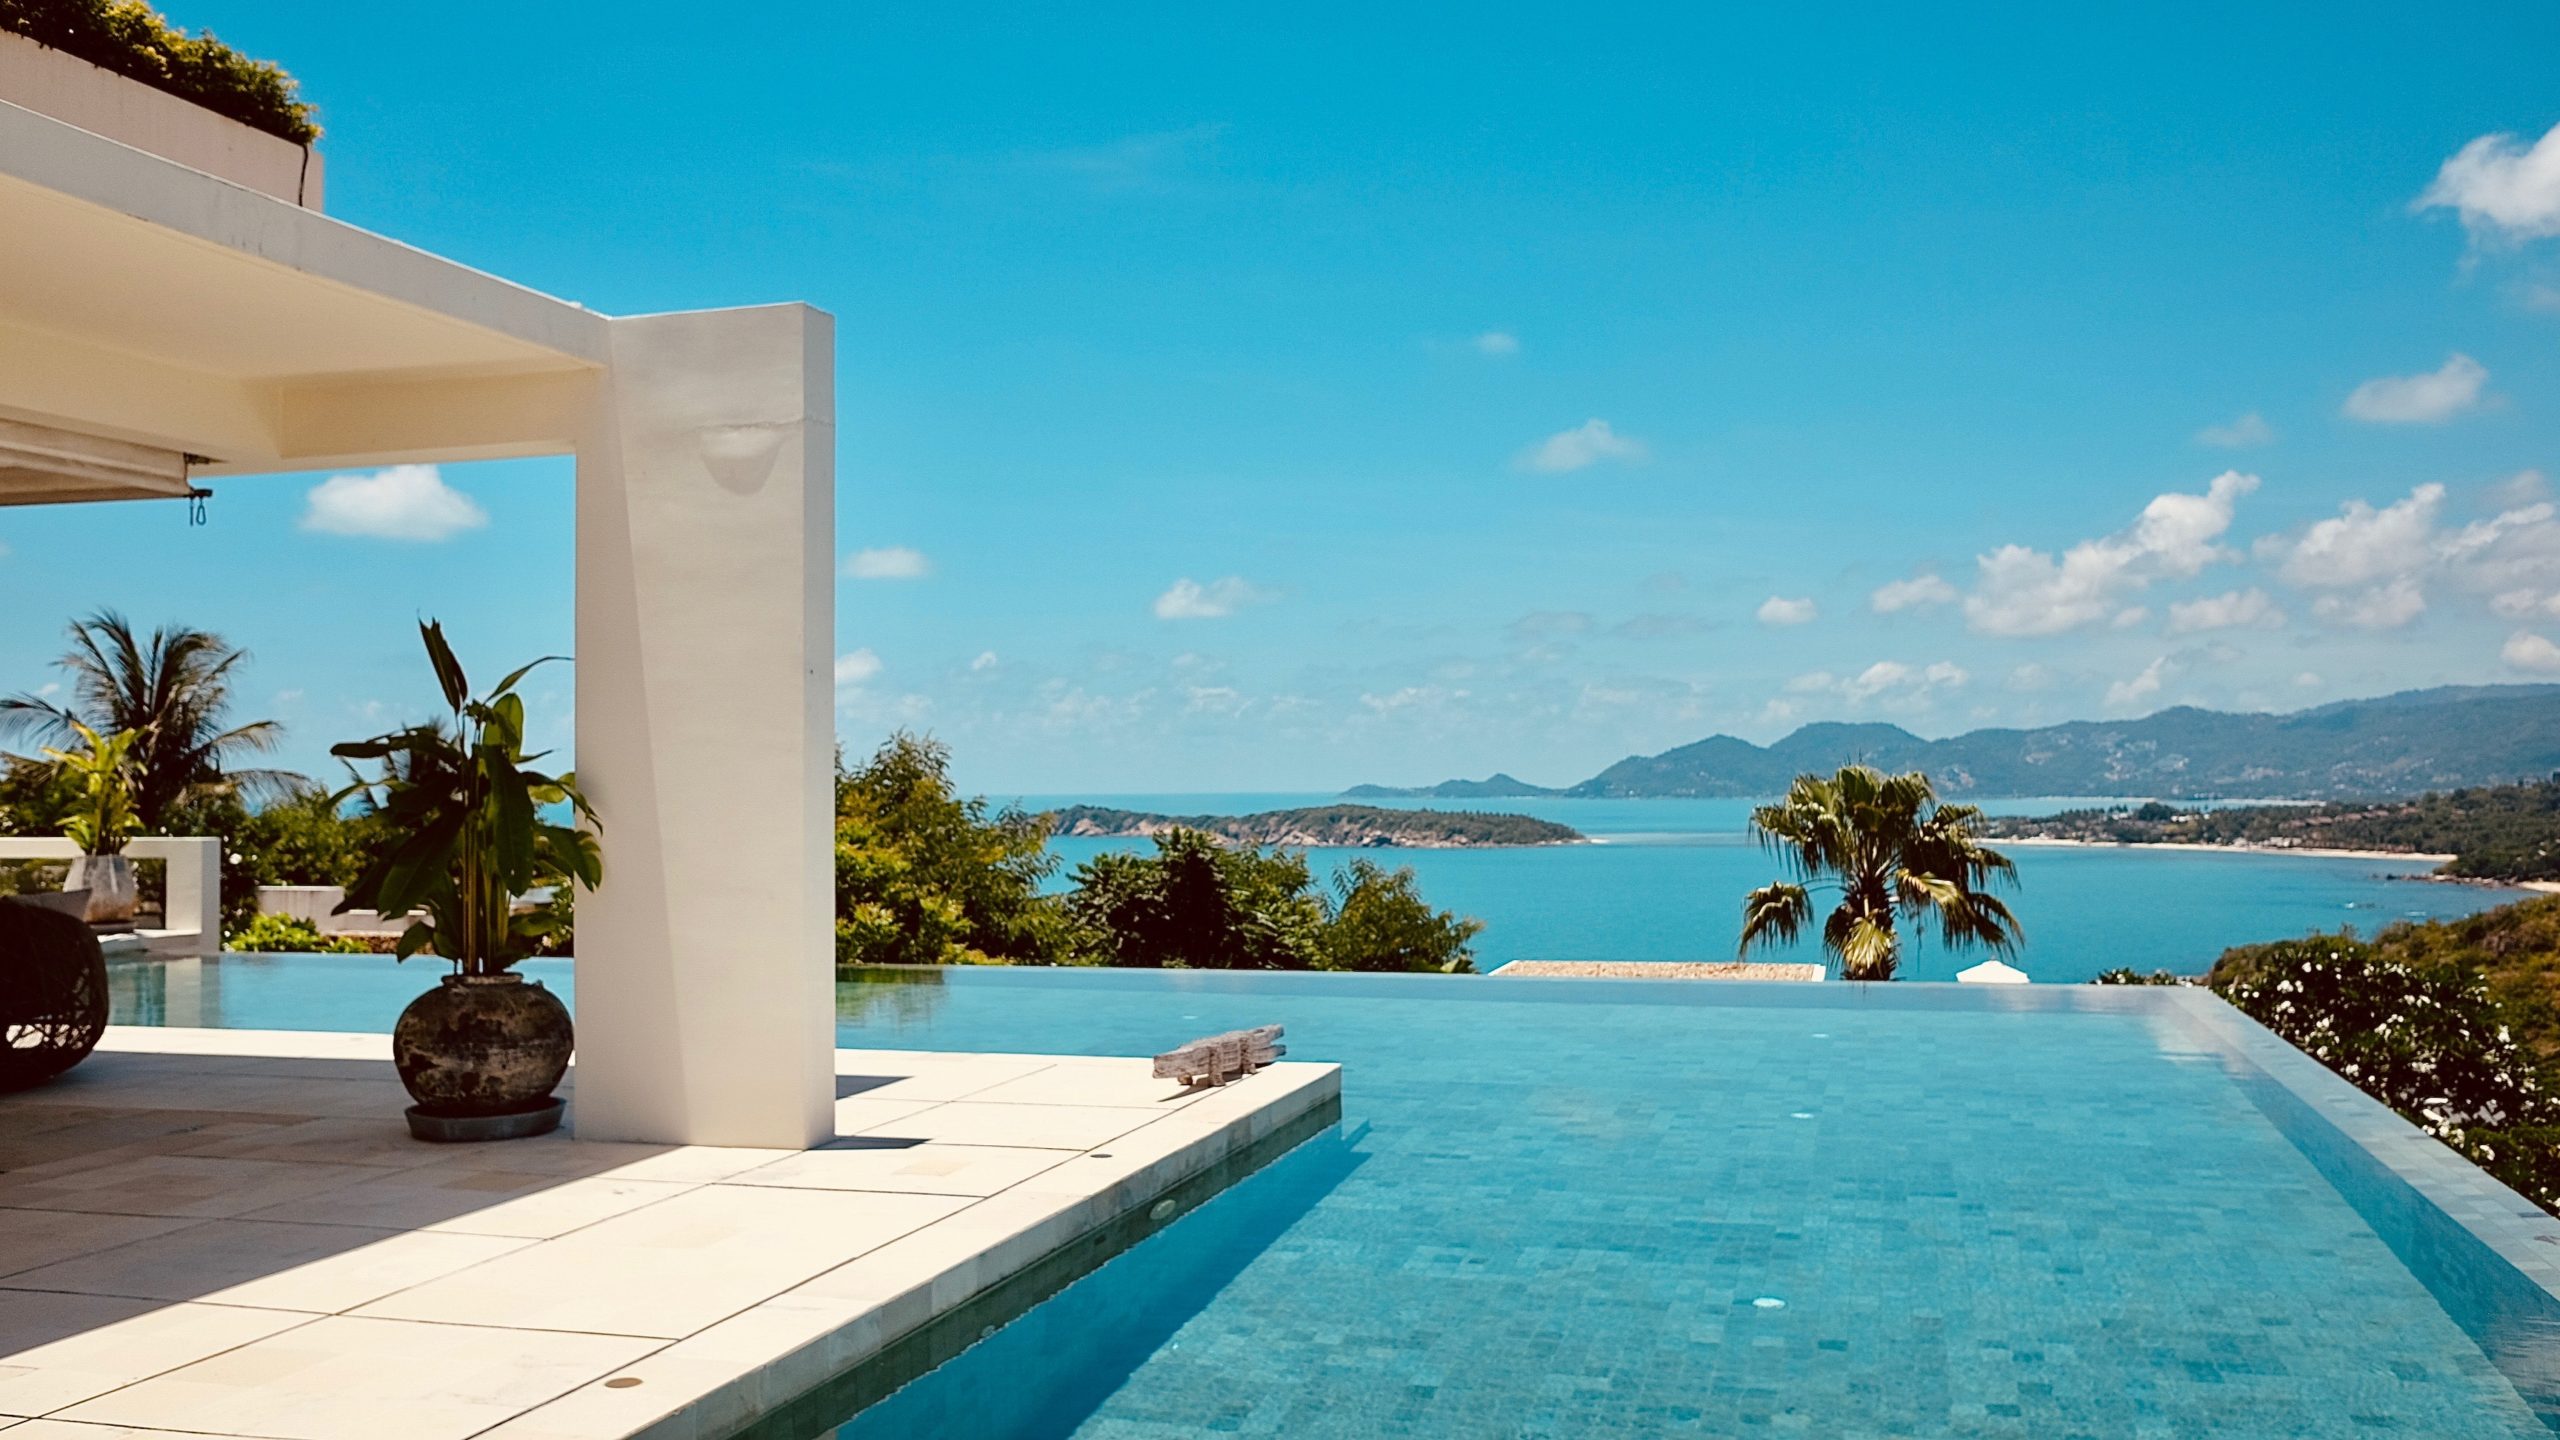 Planning A Trip To Thailand’s Koh Samui? Book These Stunning Budget Properties